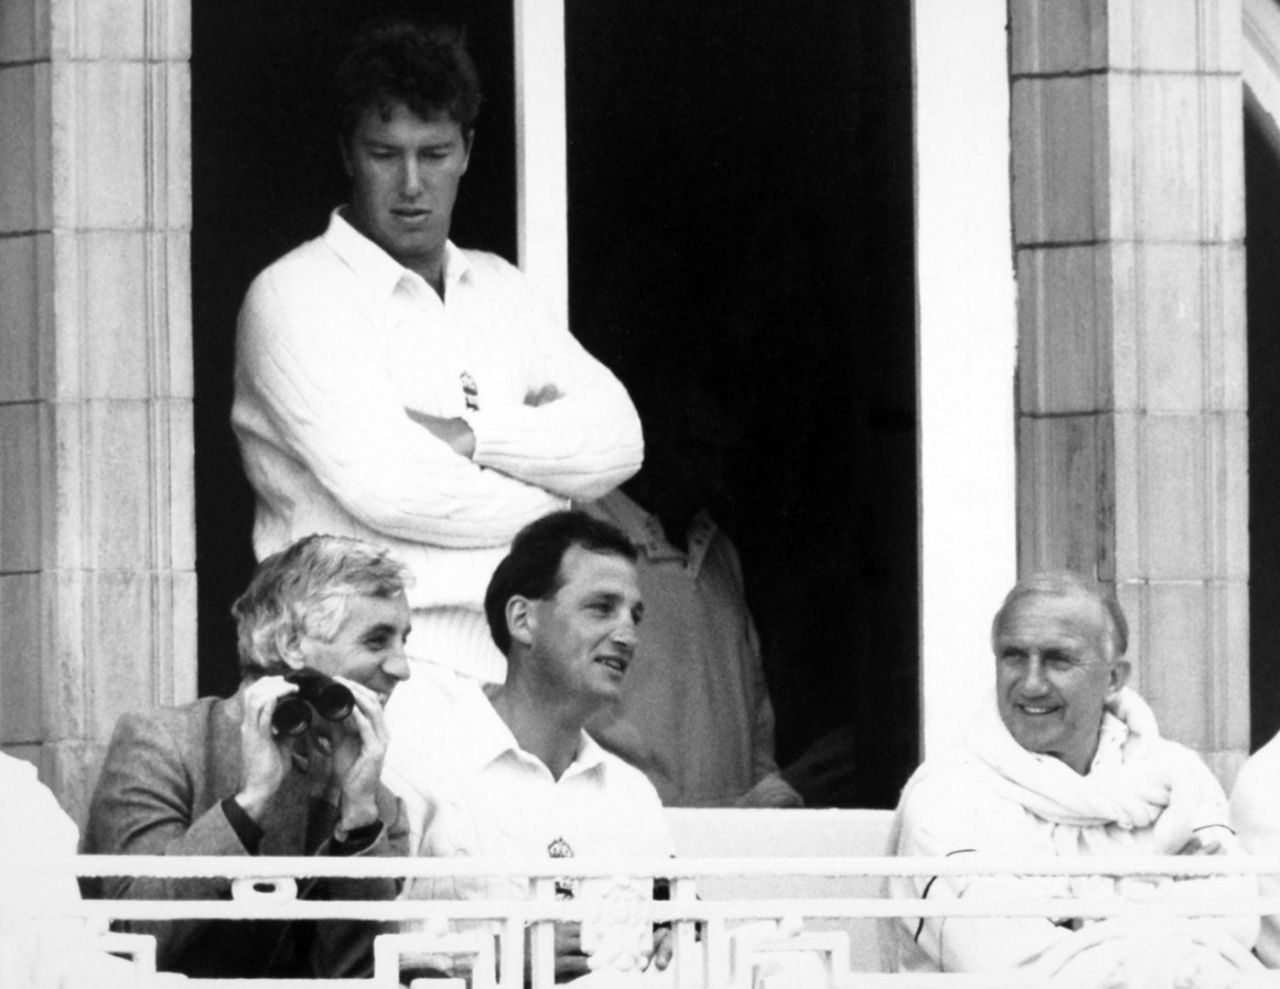 Former England captain Mike Brearely sits with current captain John Emburey and manager Micky Stewart in the balcony, and bowler Derek Pringle stands at the back, England v West Indies, 2nd Test, Lord's, June 17, 1988